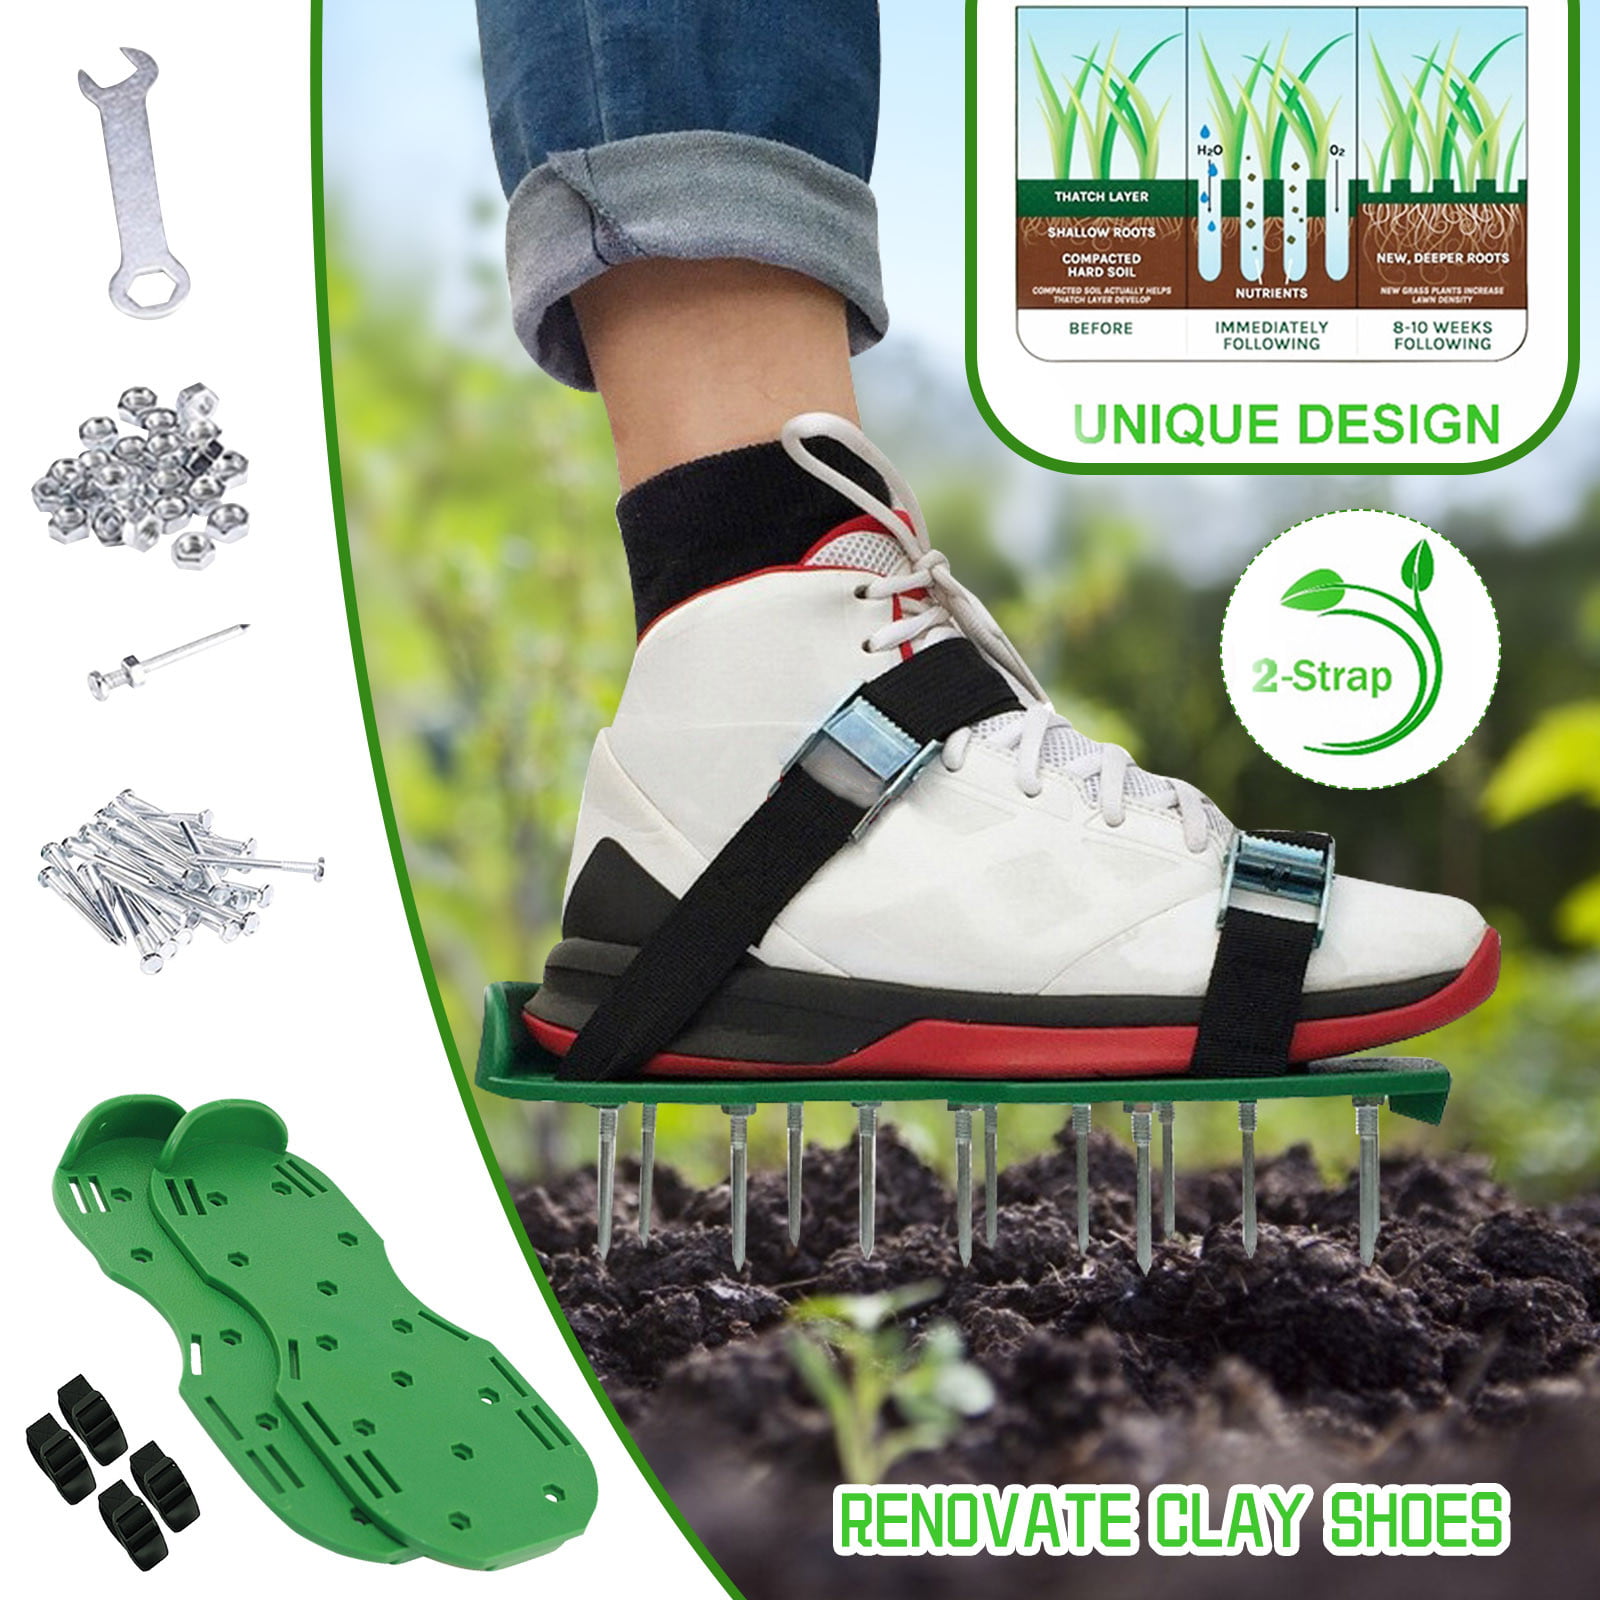 Lawn Sod Aerators shoes Spikes Aerating Sandals Garden Grass Tools H1D4 